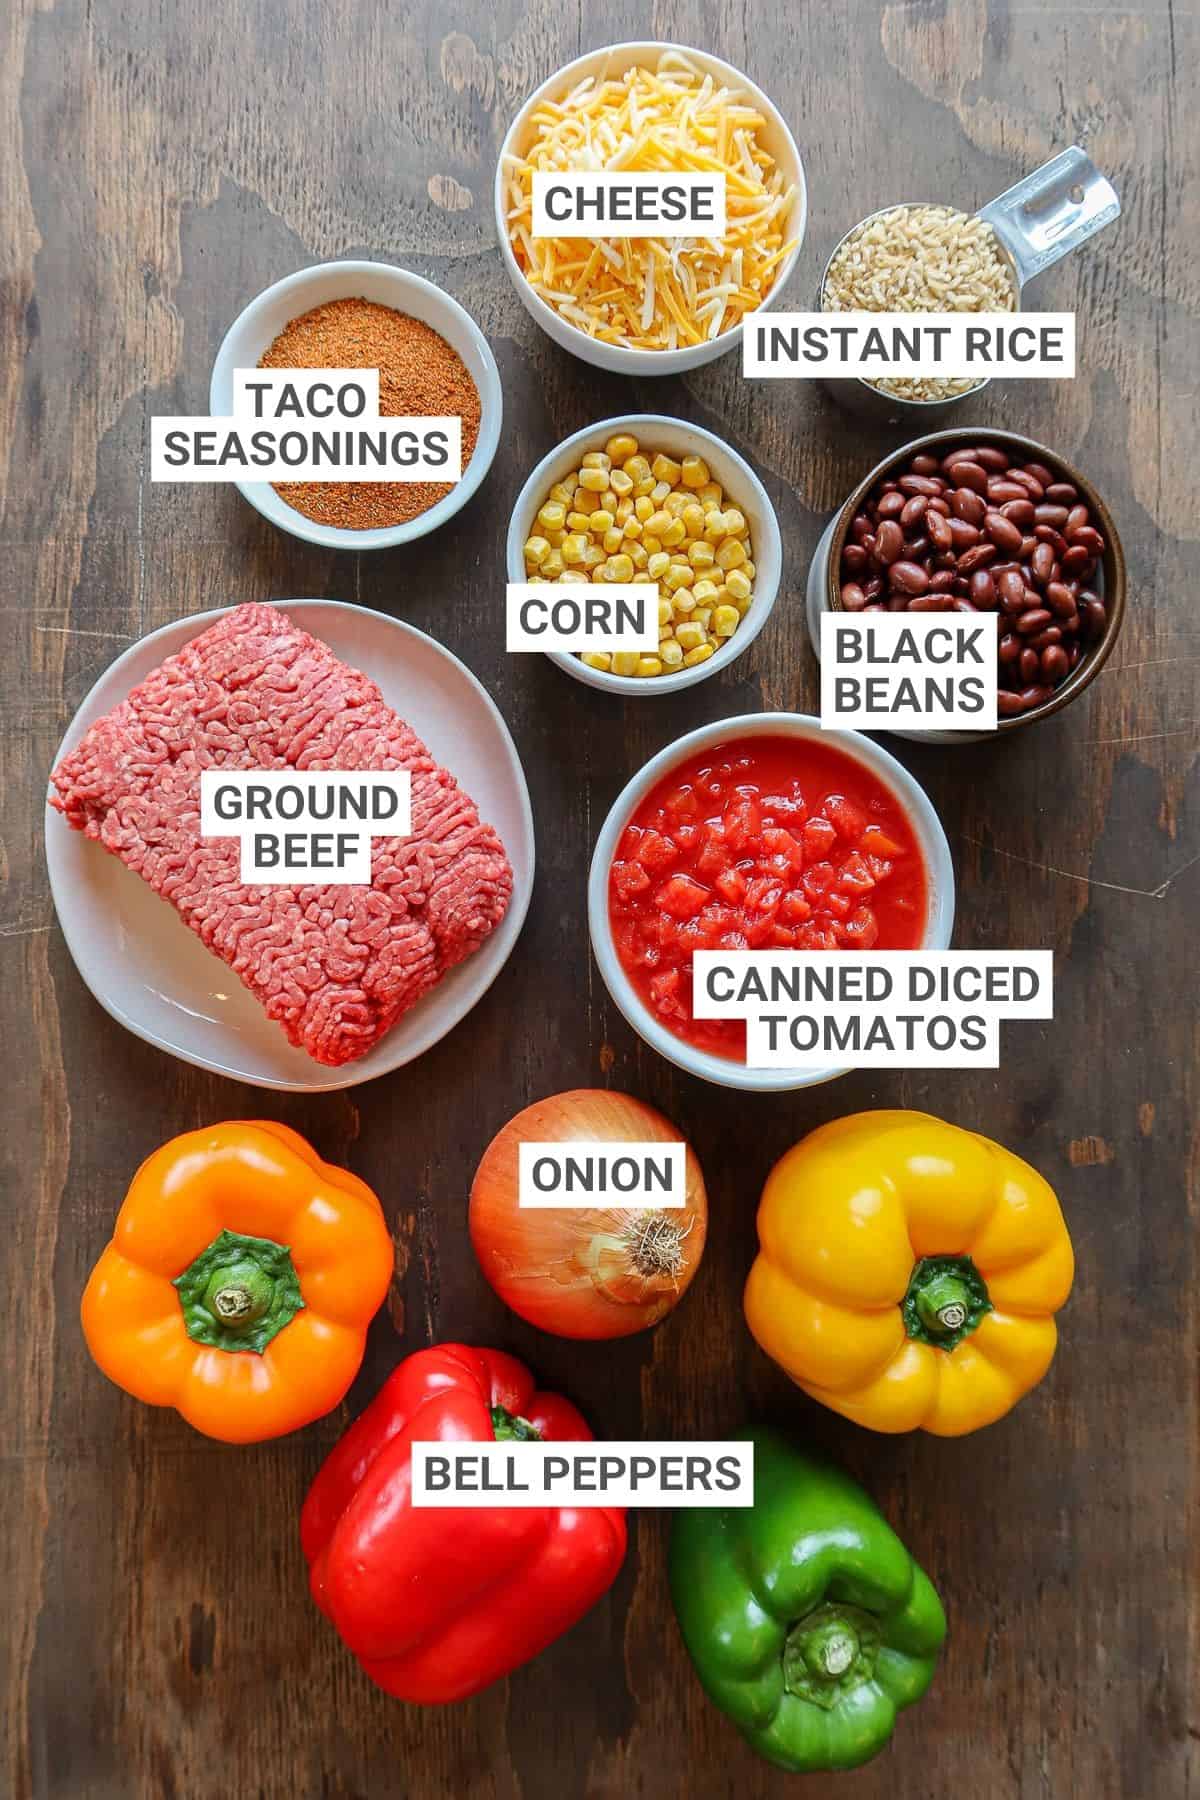 Beef taco stuffed pepper ingredients with text overlay labels.